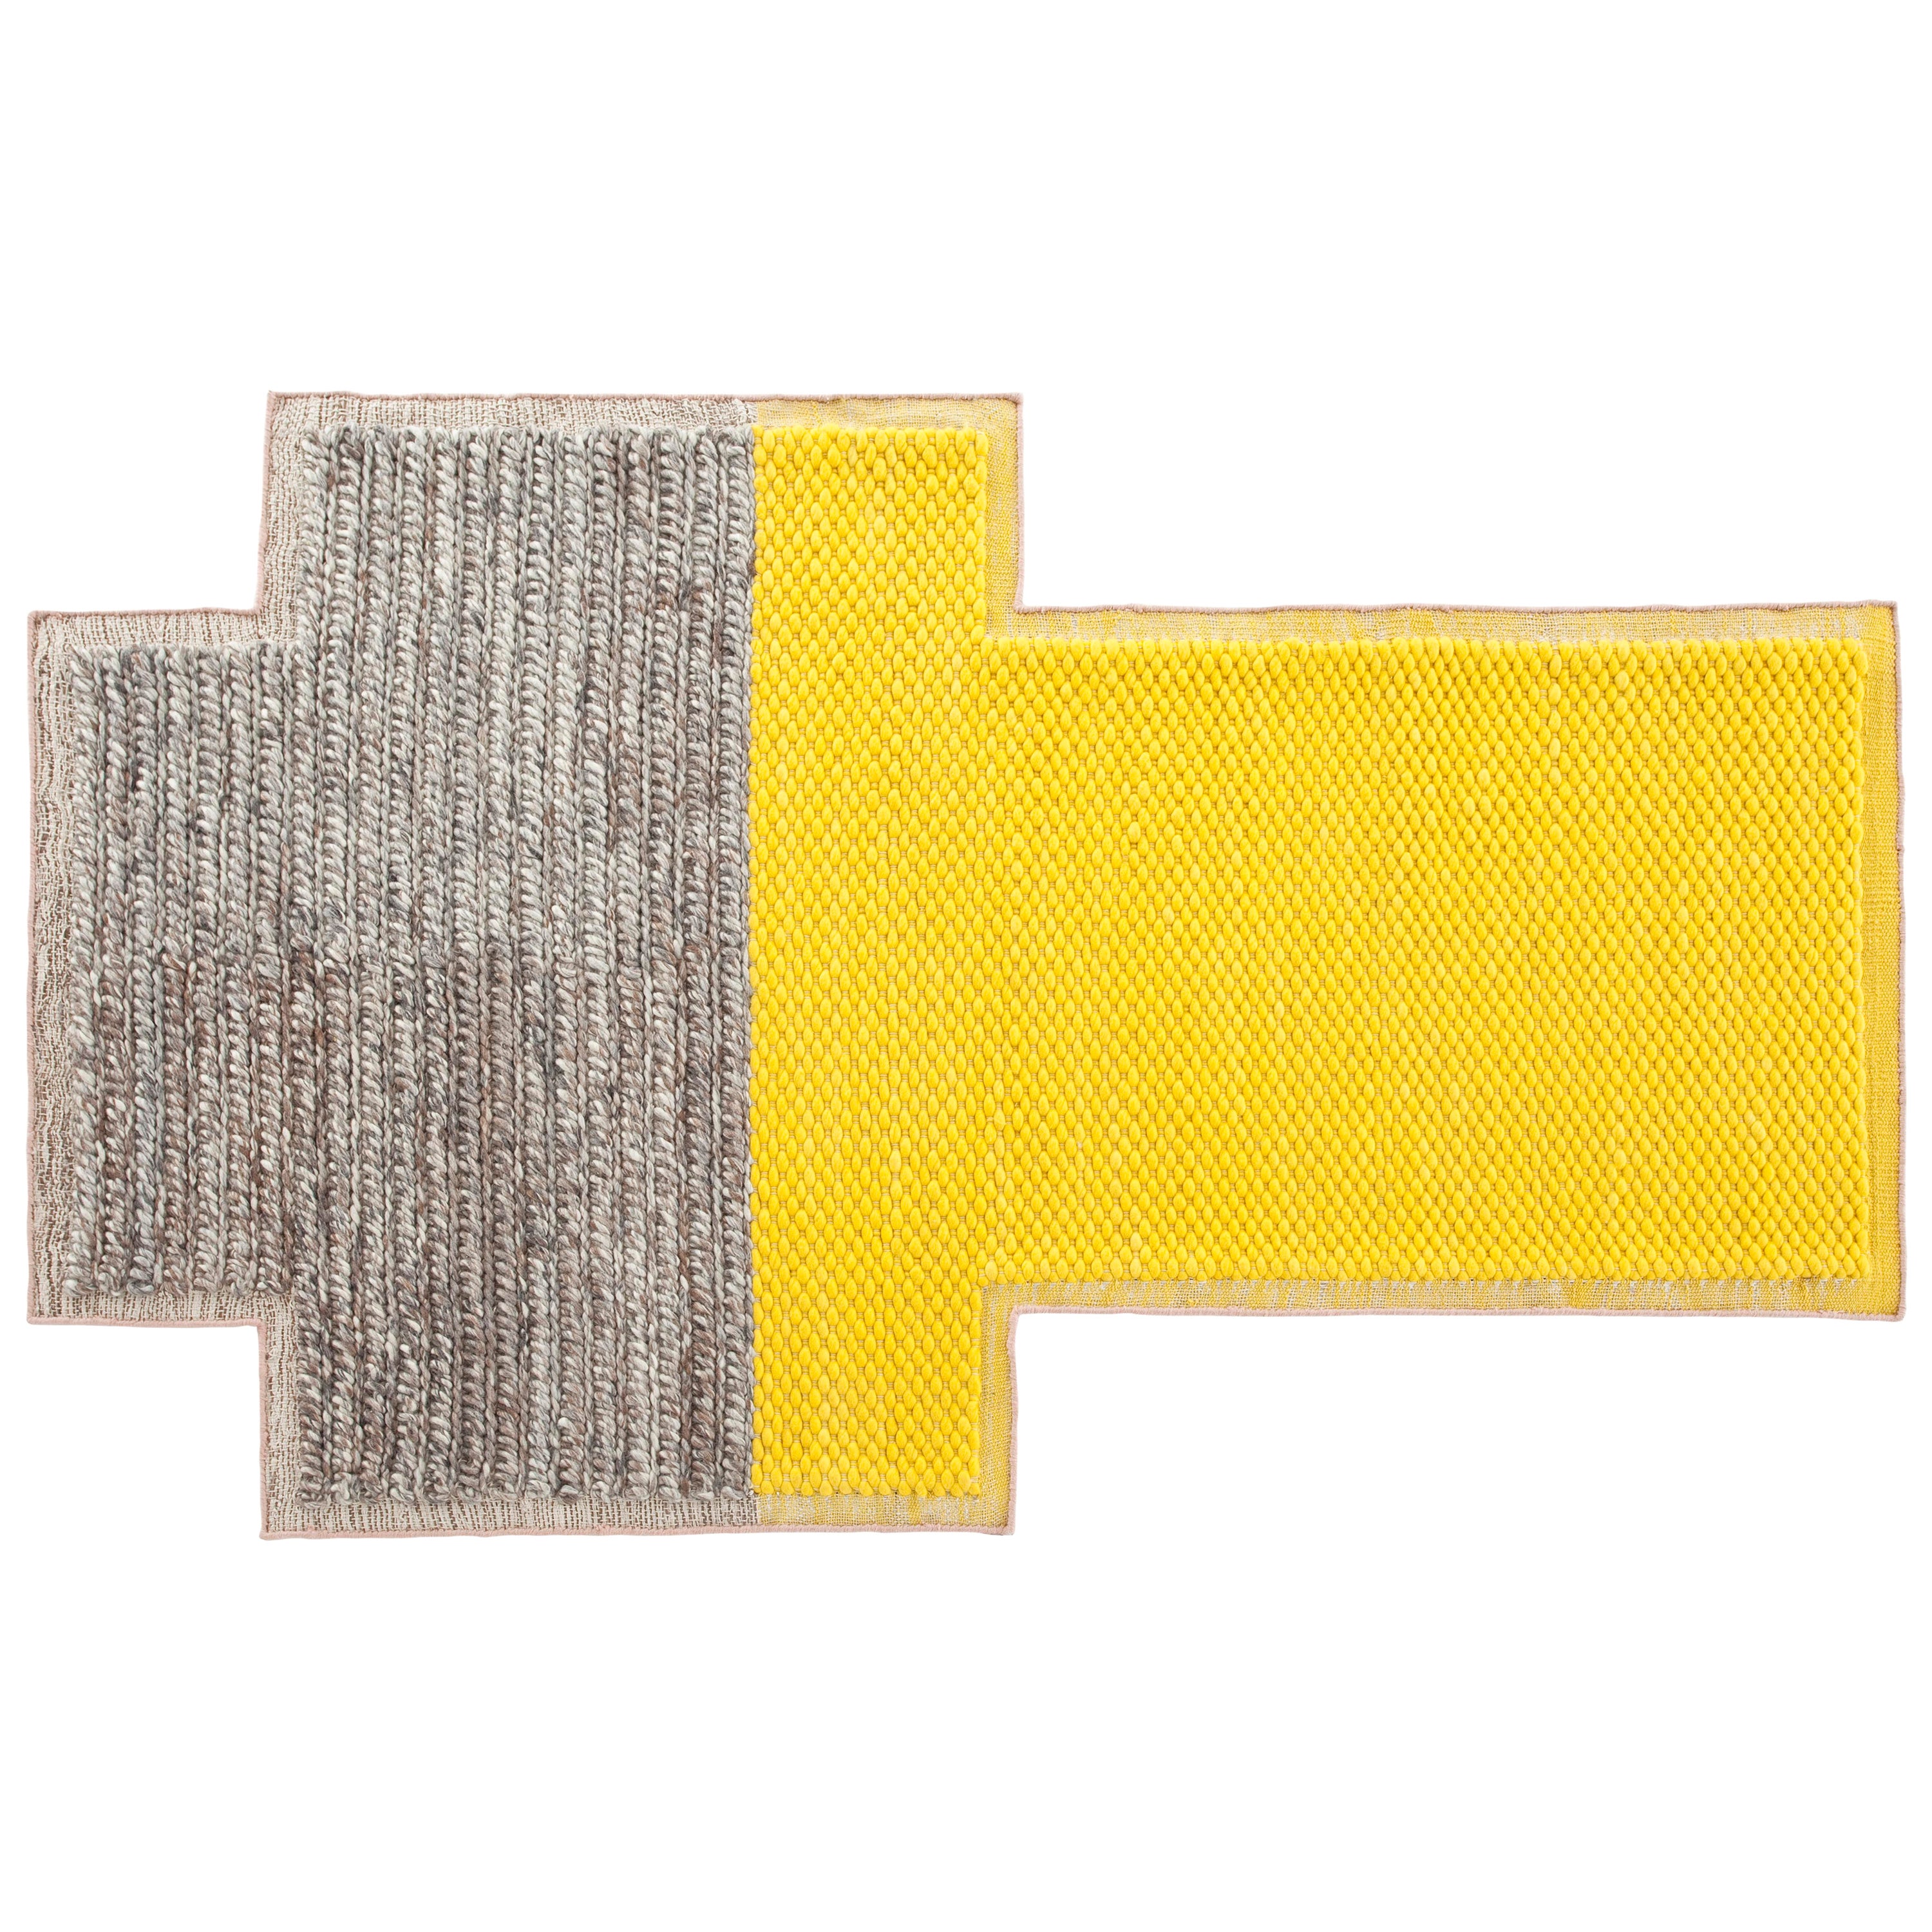 GAN Mangas Space Small Rectangular Rug Plait in Yellow by Patricia Urquiola For Sale